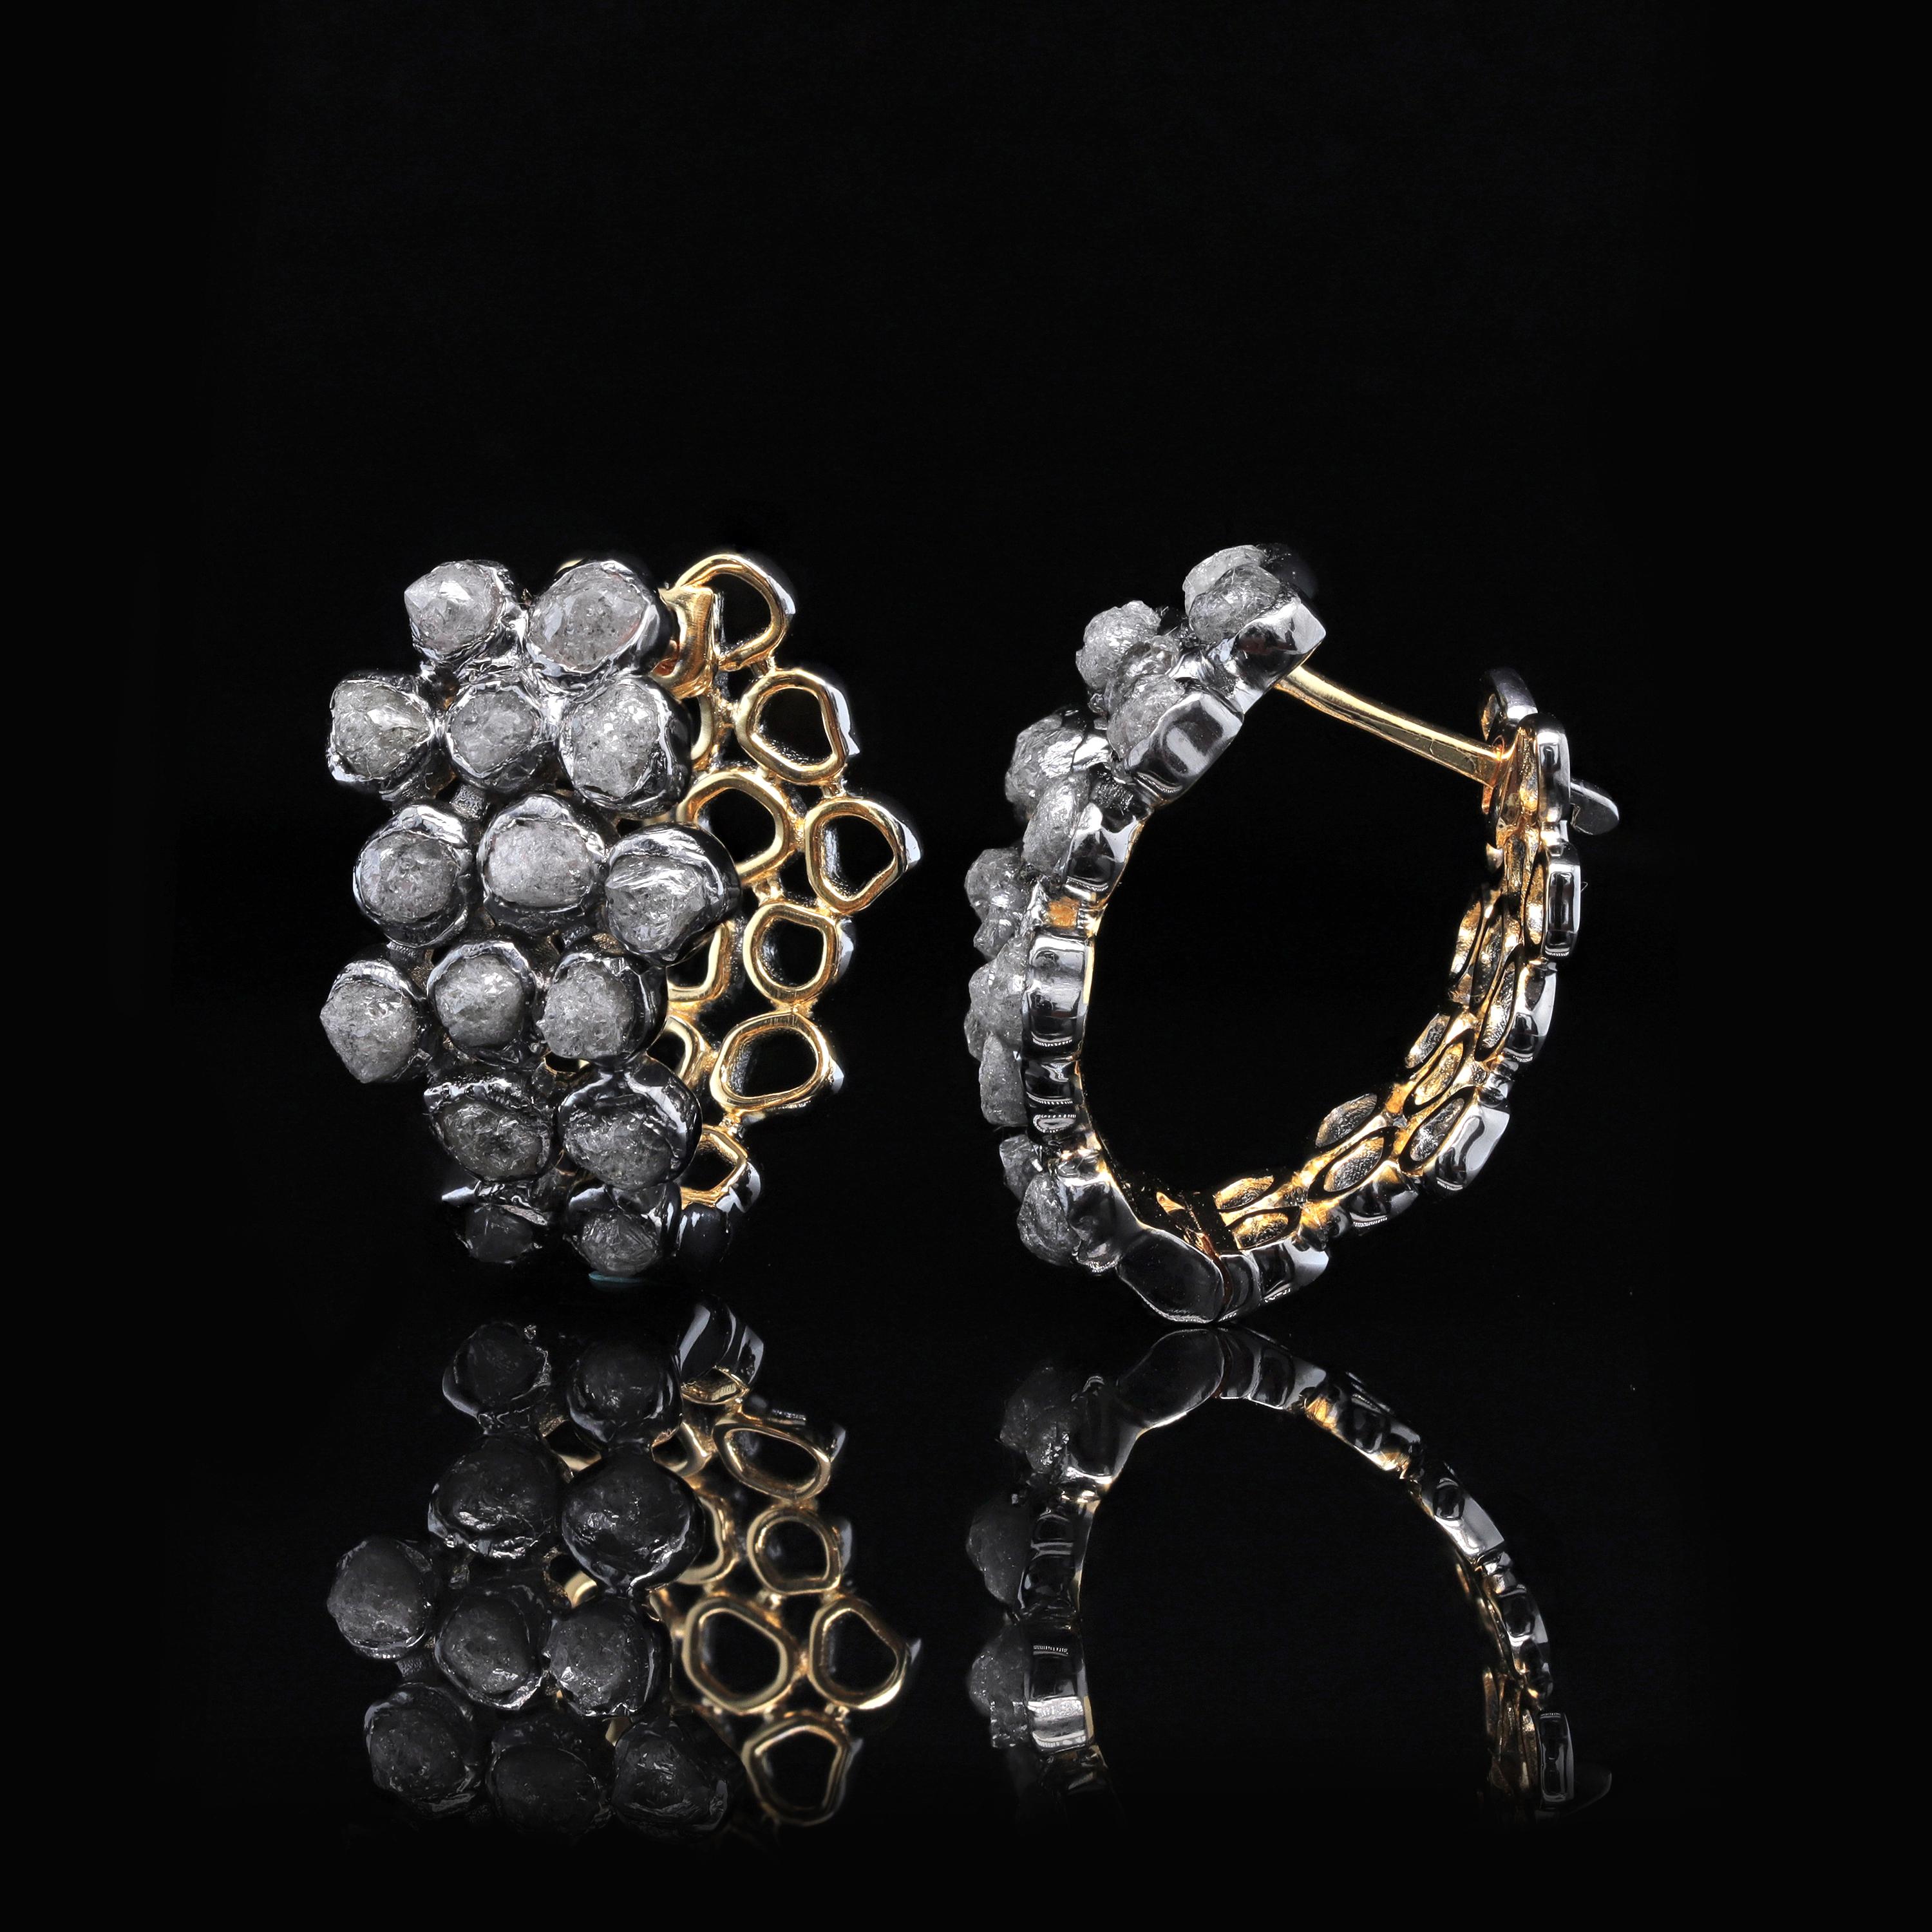 Modern Adeitiy recycled silver earrings with mined diamonds and black rhodium plating